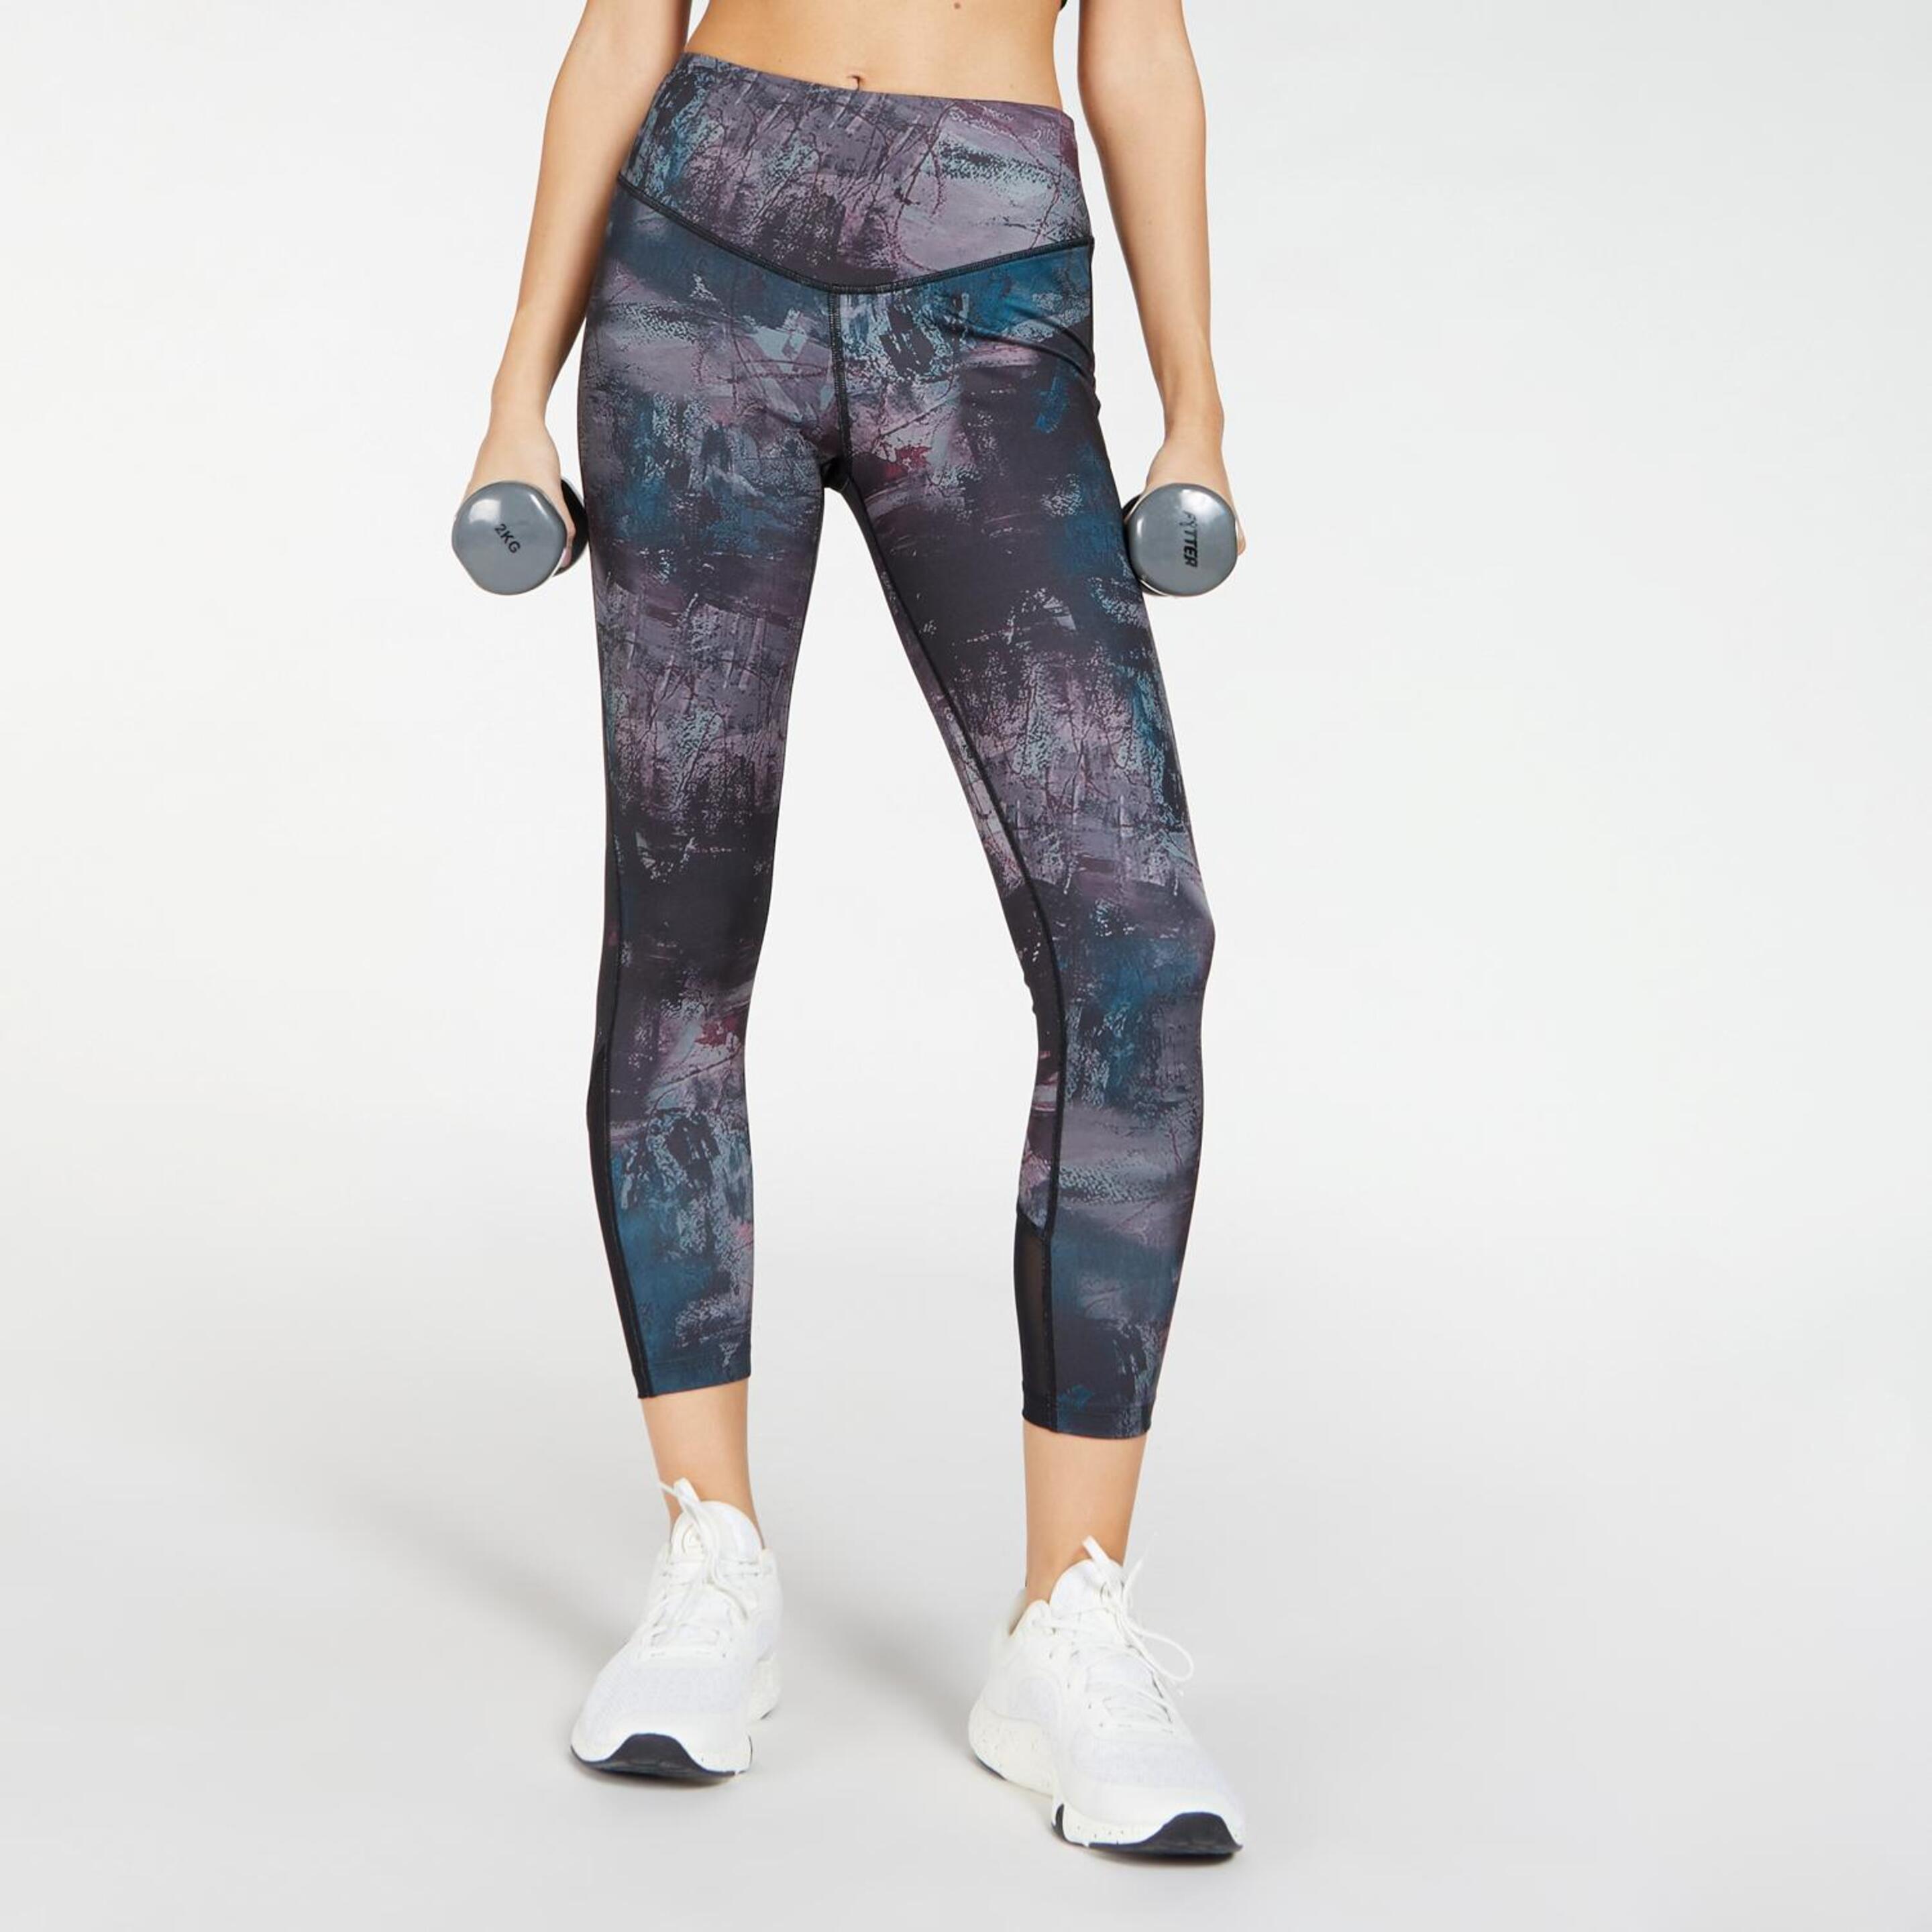 Doone Gym - Colores - Mallas Fitness Mujer